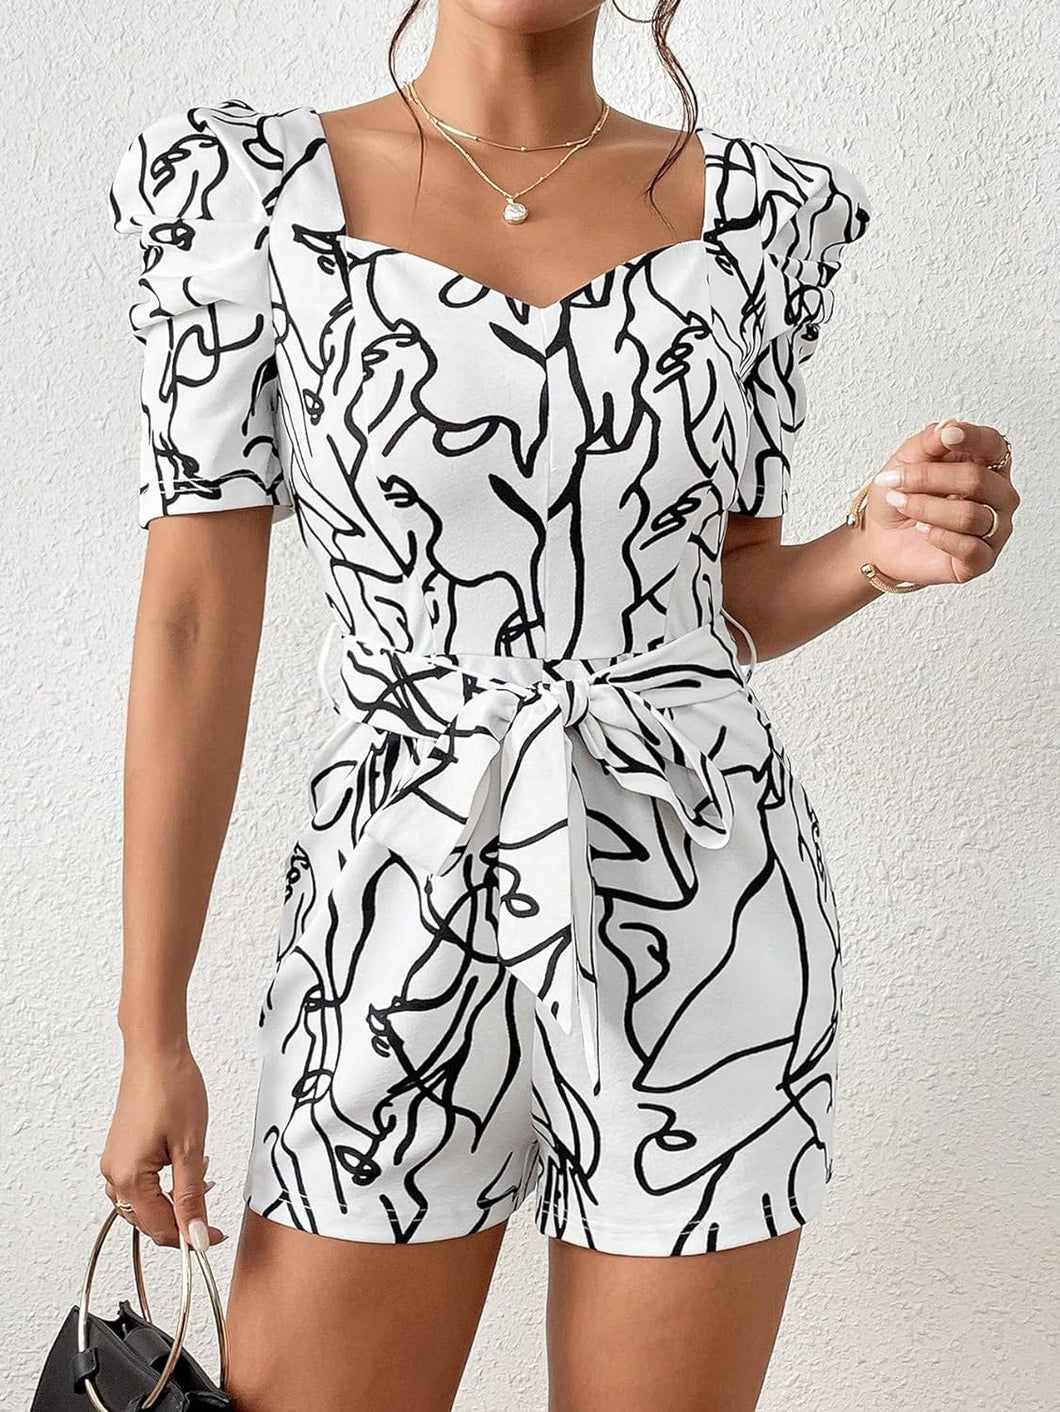 White Sweetheart Graphic Printed Short Sleeve Romper